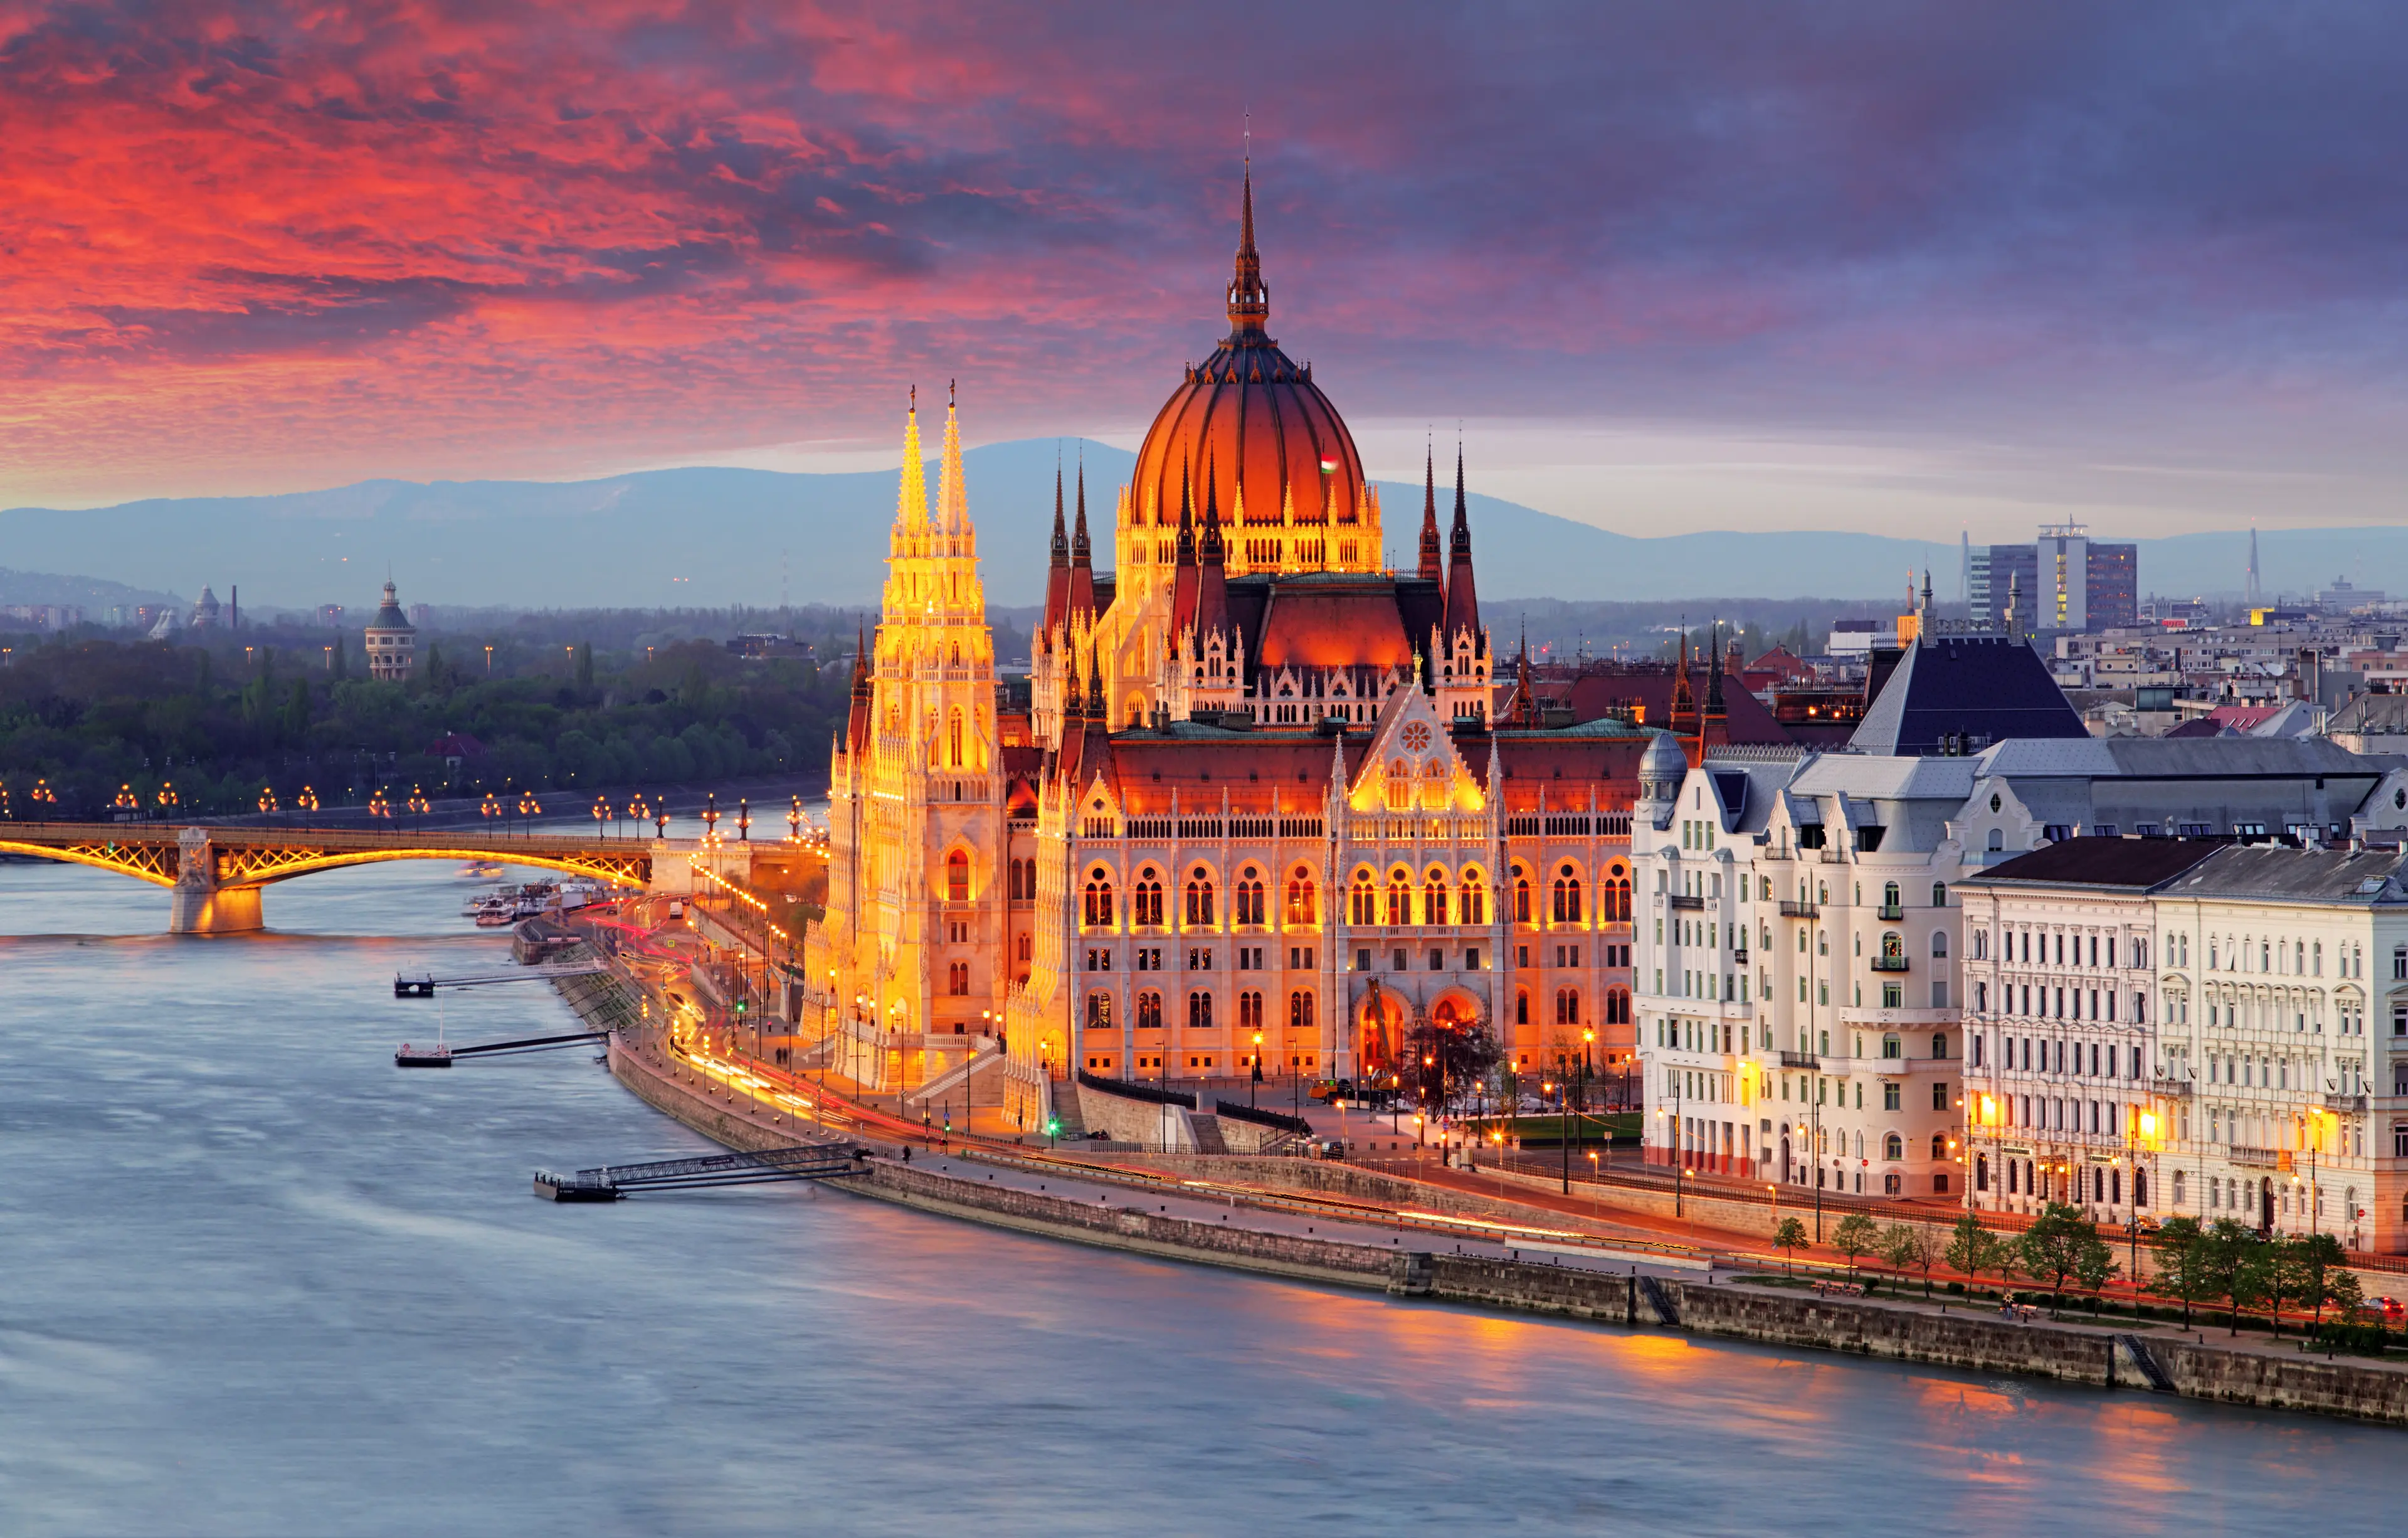 3-Day Local Adventure and Relaxation Journey for Couples in Budapest